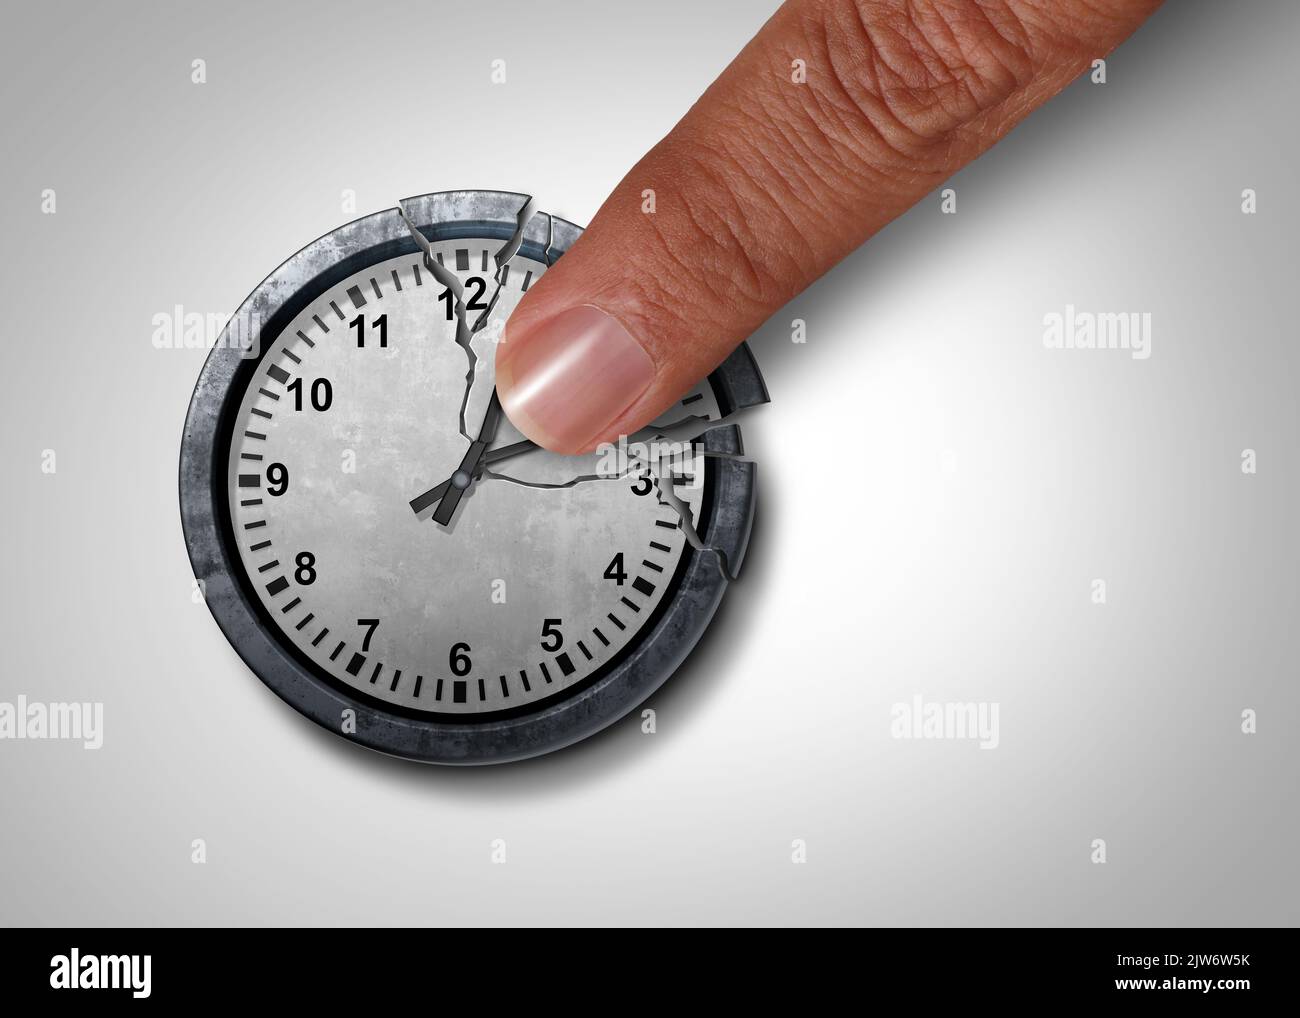 Stopping time as a business metaphor for controling appointments or deadlines as a giant finger breaking a clock to stop the watch. Stock Photo